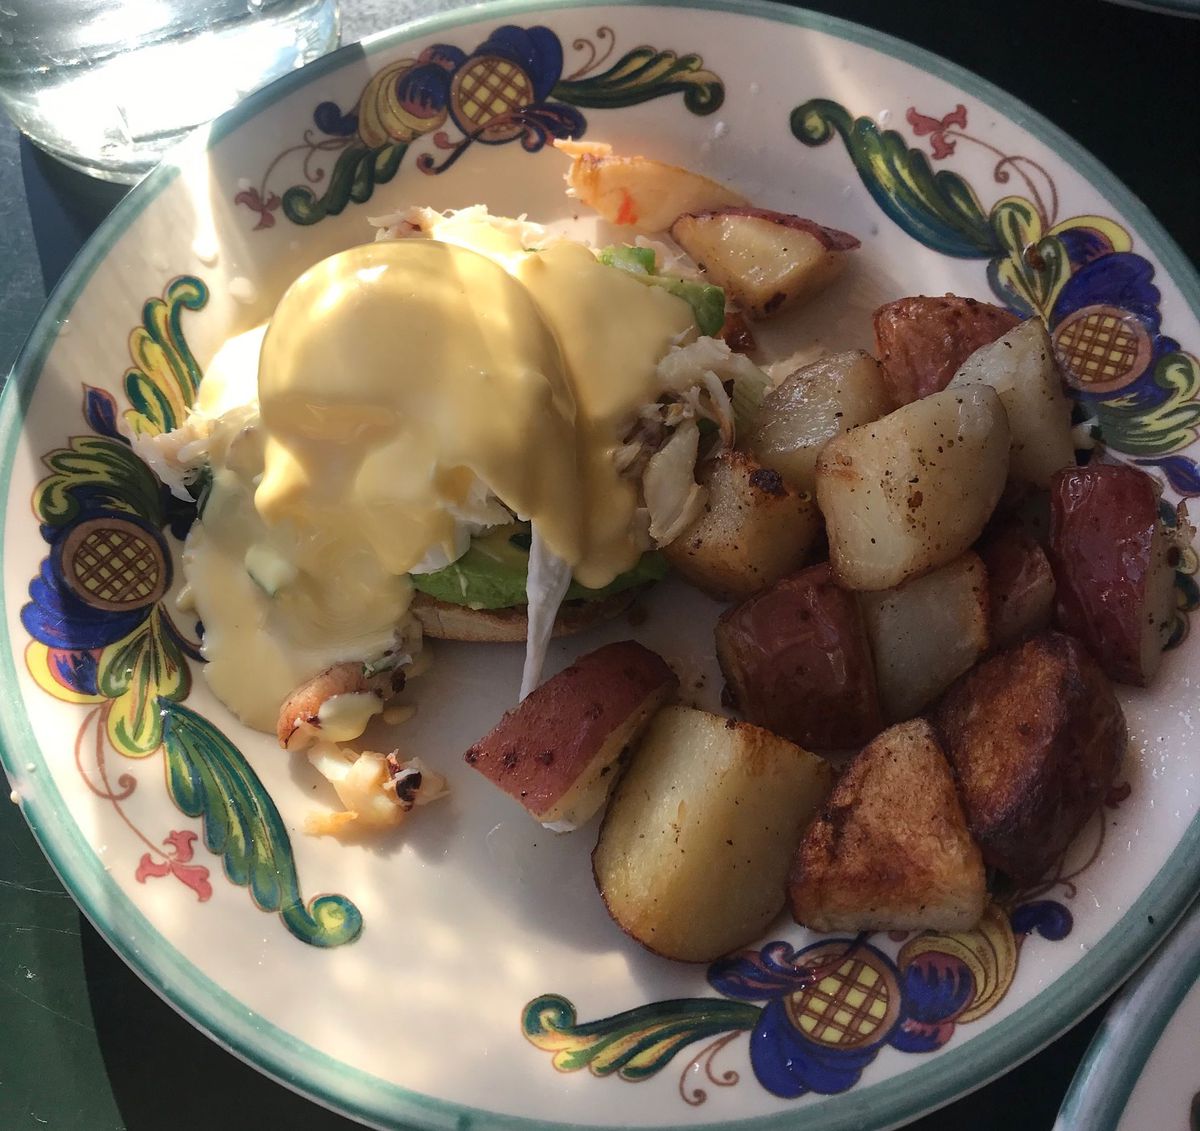 A flowered plate with eggs Benedict covered in hollandaise.